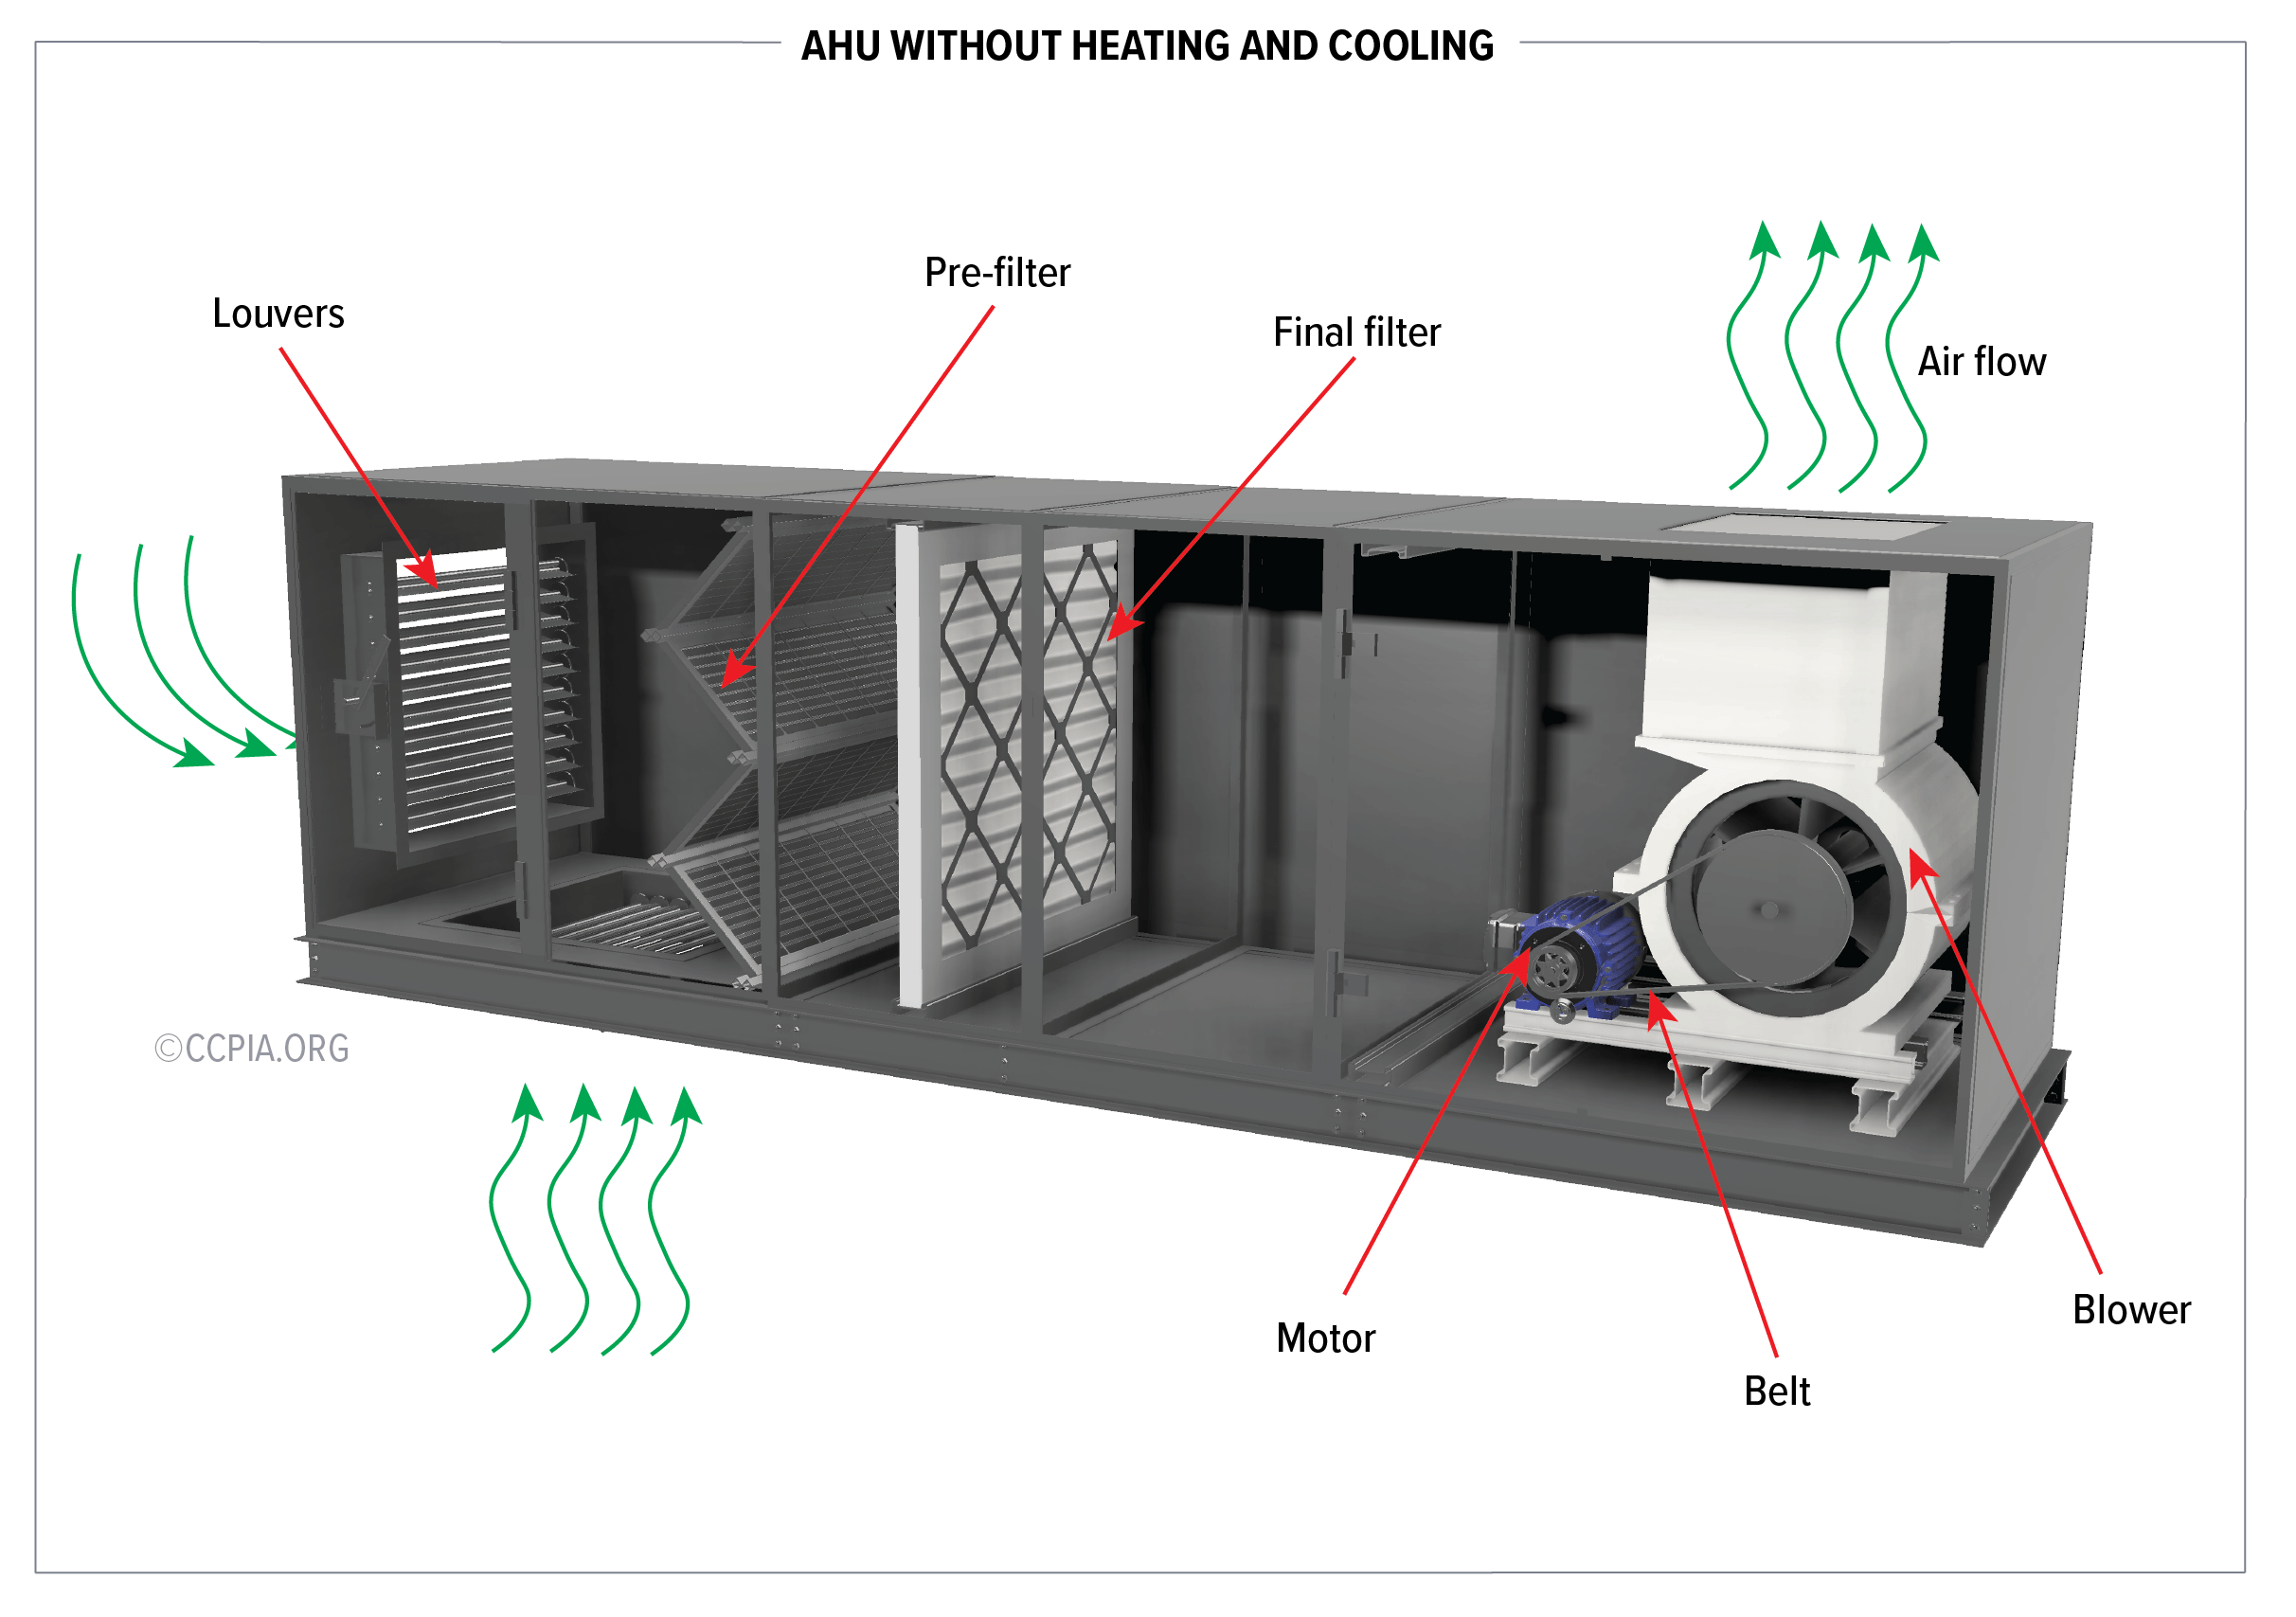 An air handling unit (AHU) takes outside air, filters it, and pushes it through a building's ductwork. This AHU does not have a heating or cooling element.